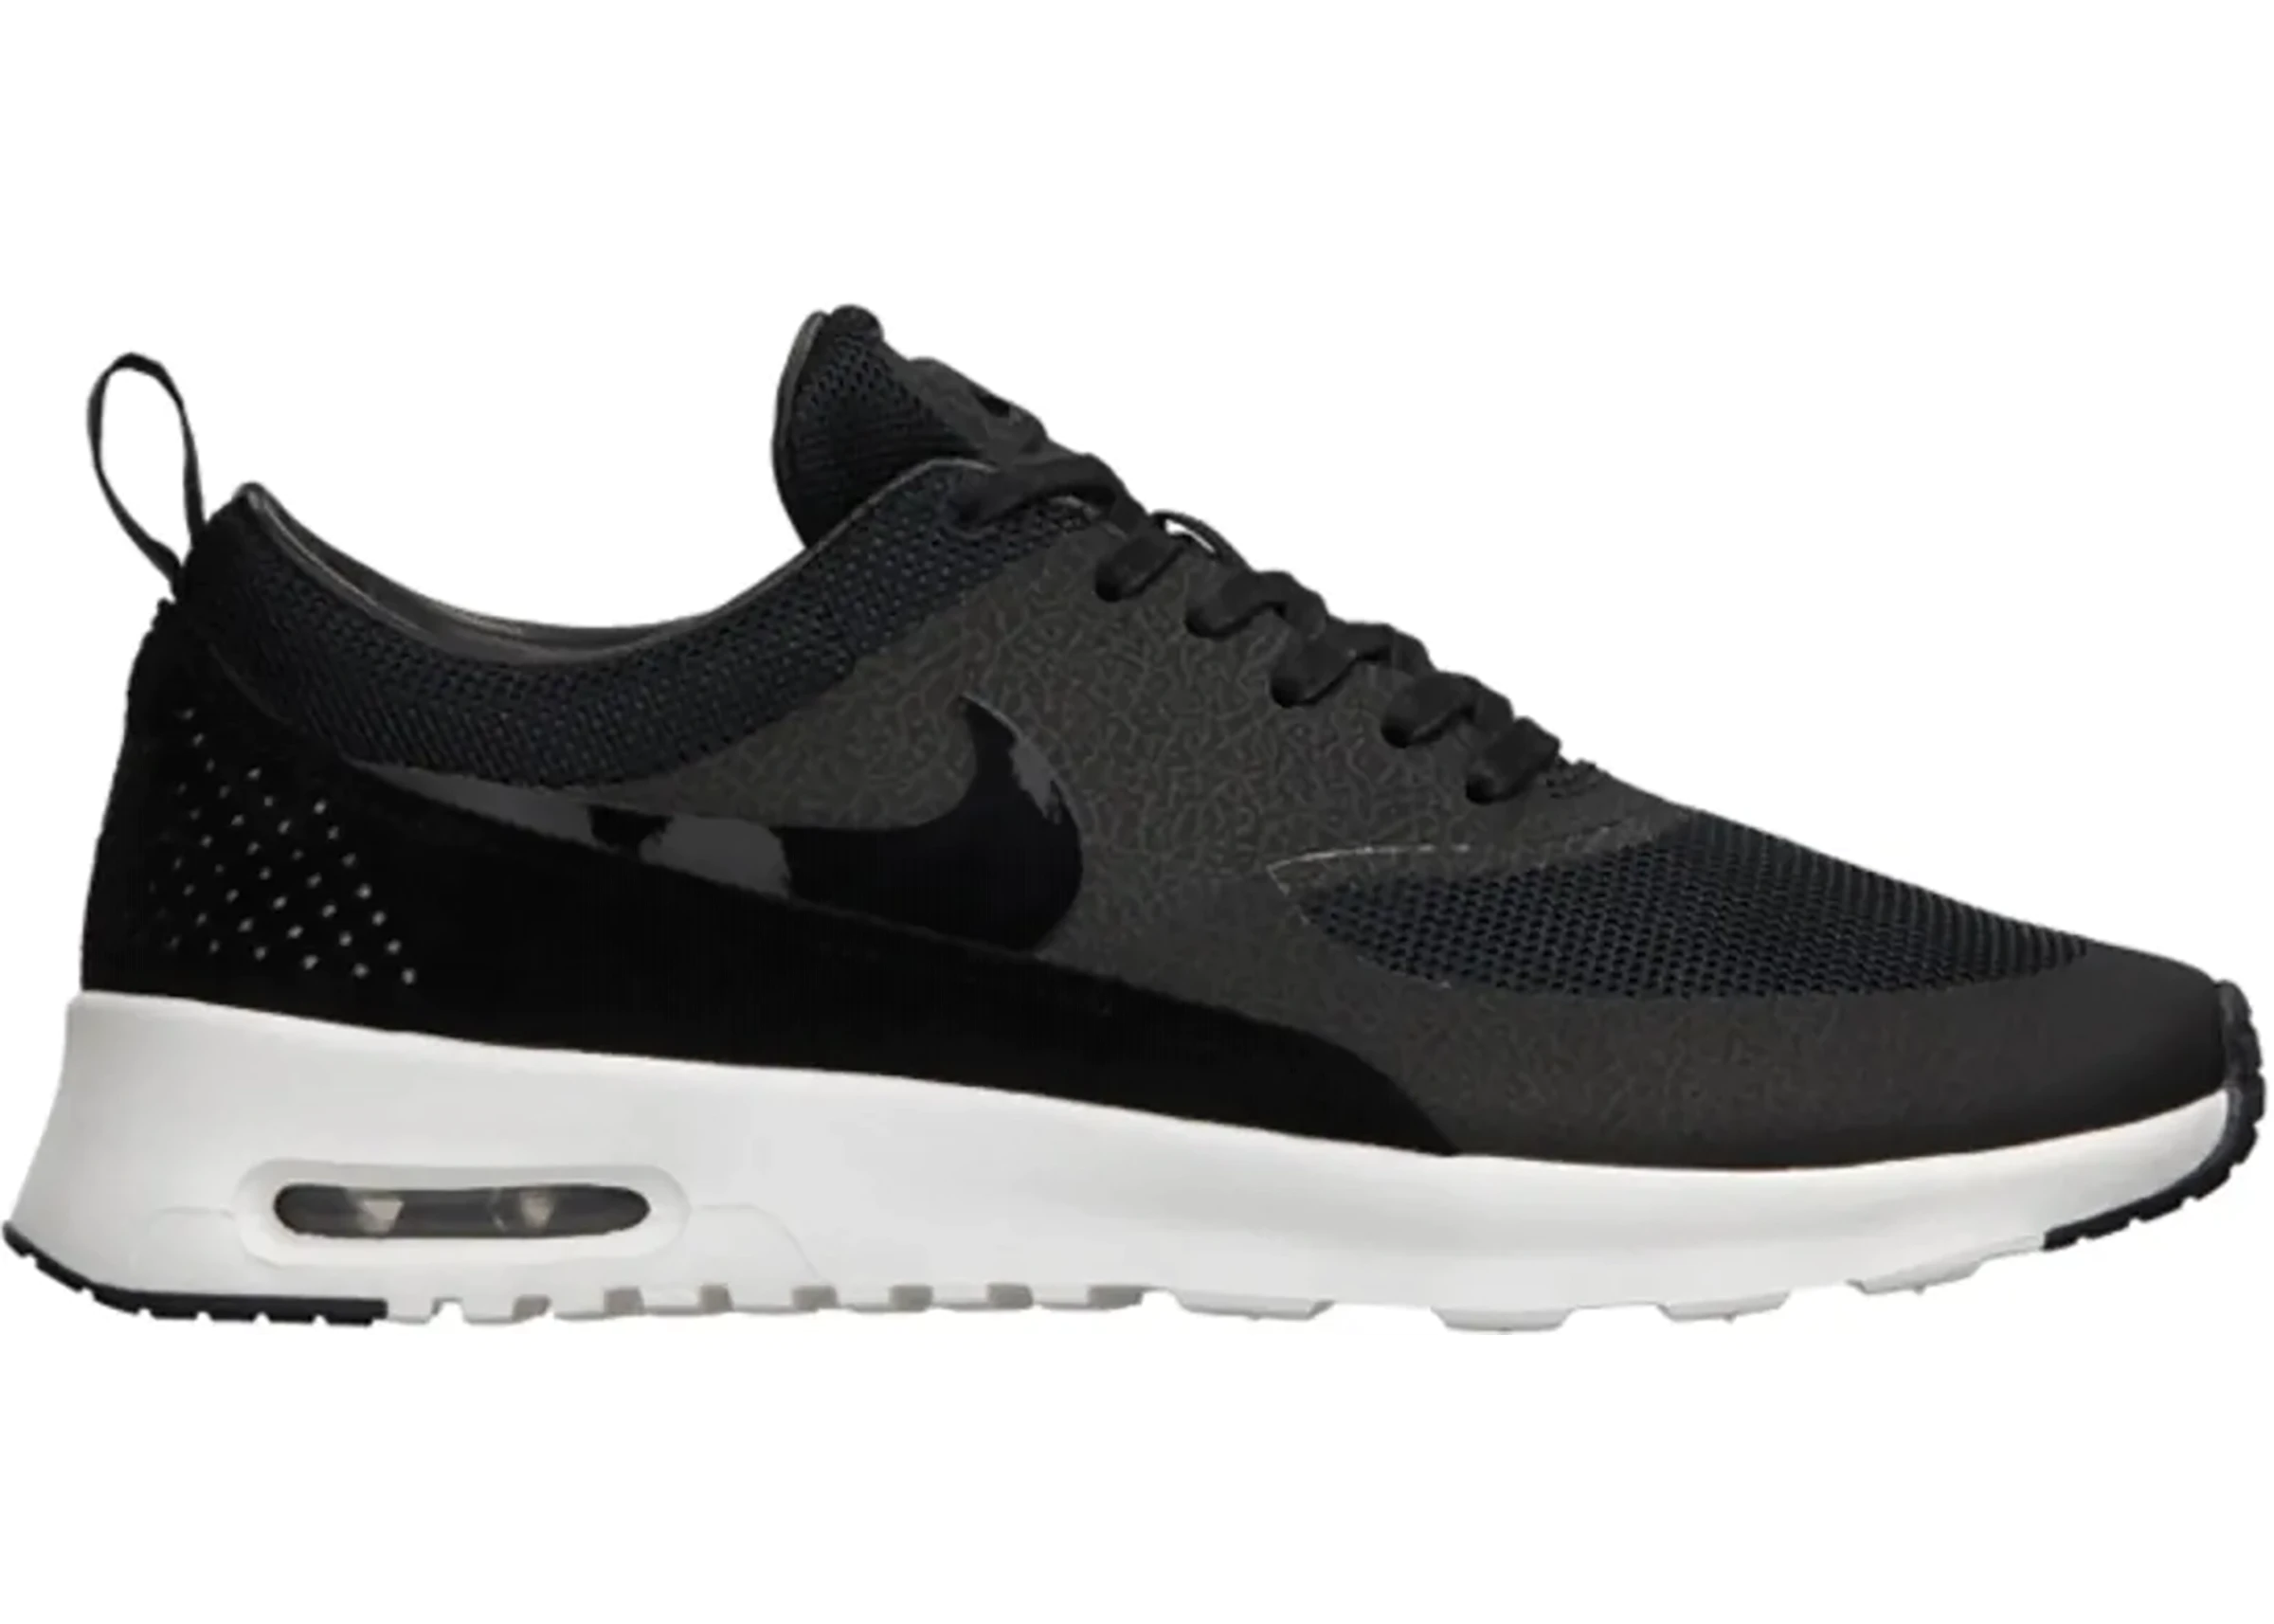 Kinematics Chinese cabbage complexity Nike Air Max Thea Black Anthracite (W) - 618213-001 - US